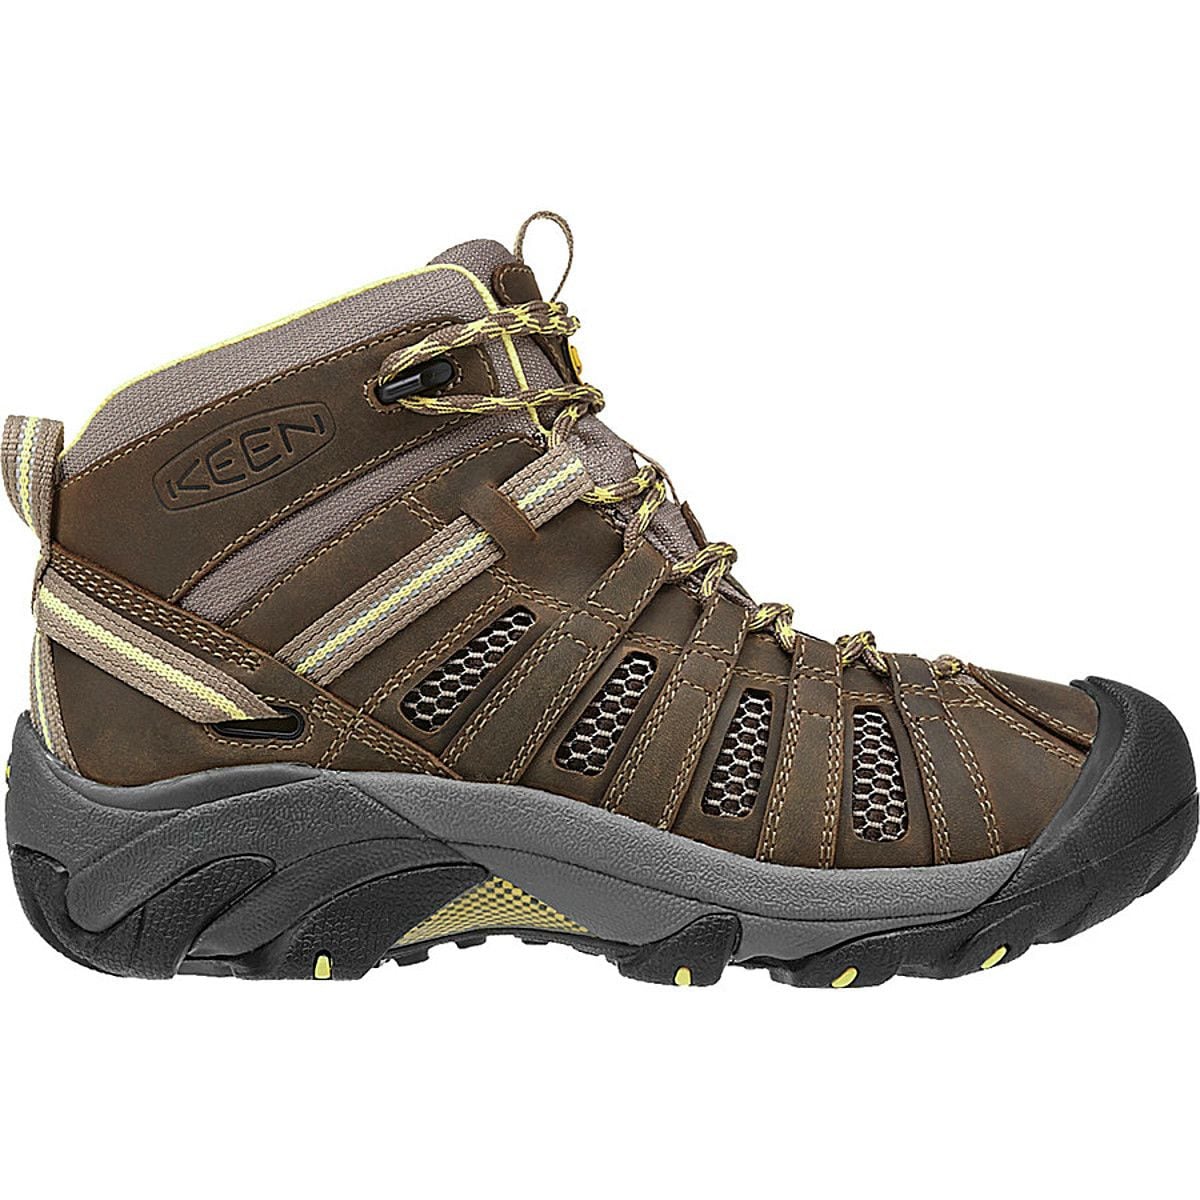 Details about KEEN Voyageur Mid Hiking Boot - Women's